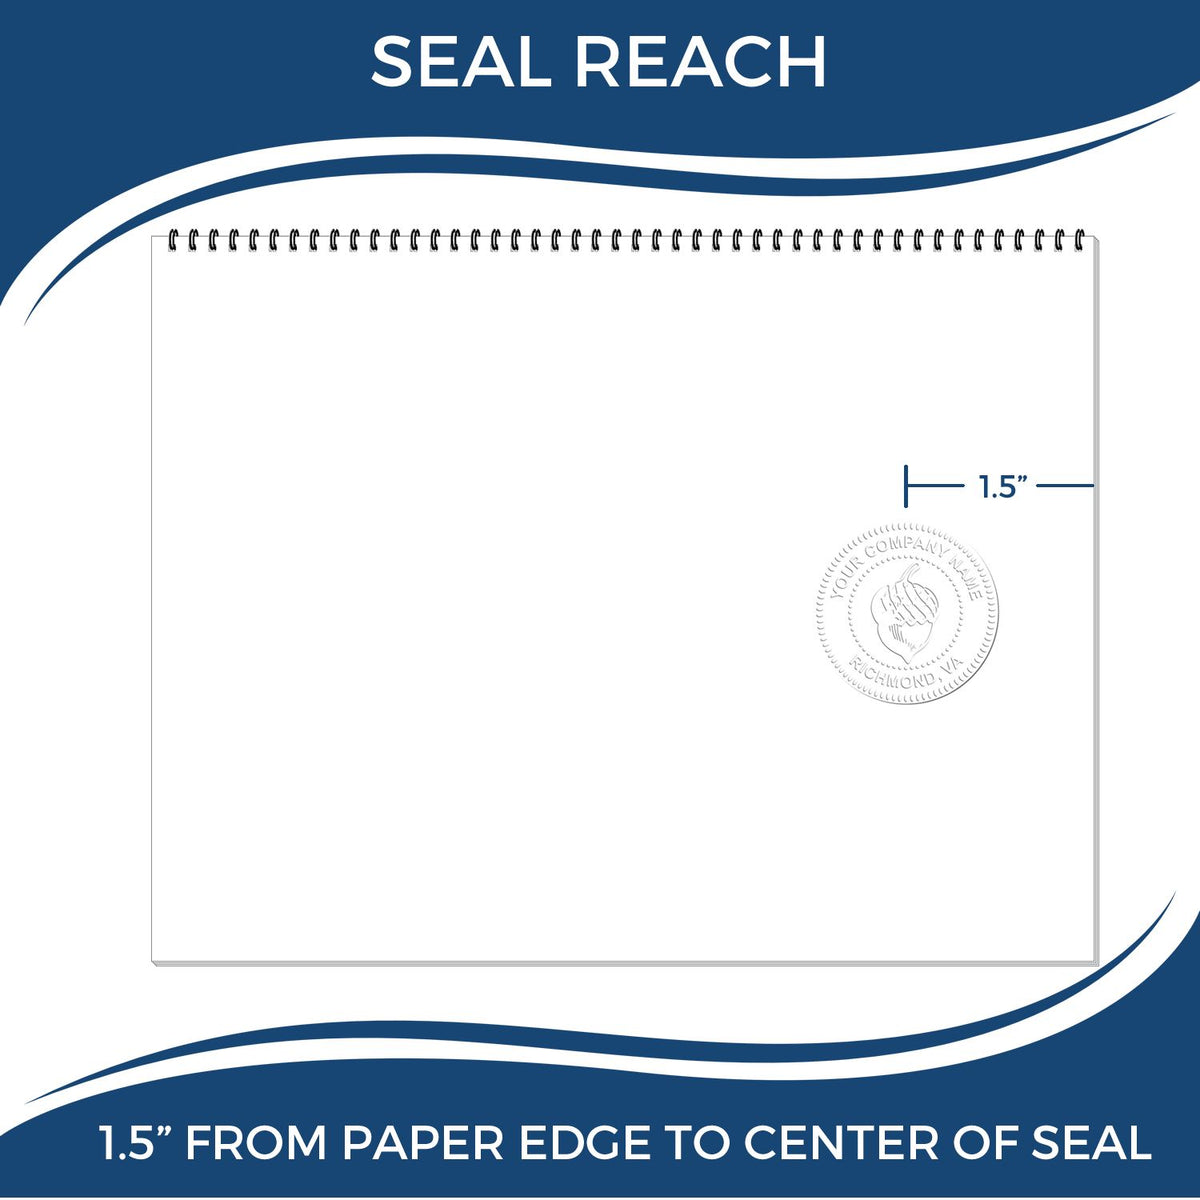 An infographic showing the seal reach which is represented by a ruler and a miniature seal image of the Hybrid West Virginia Geologist Seal